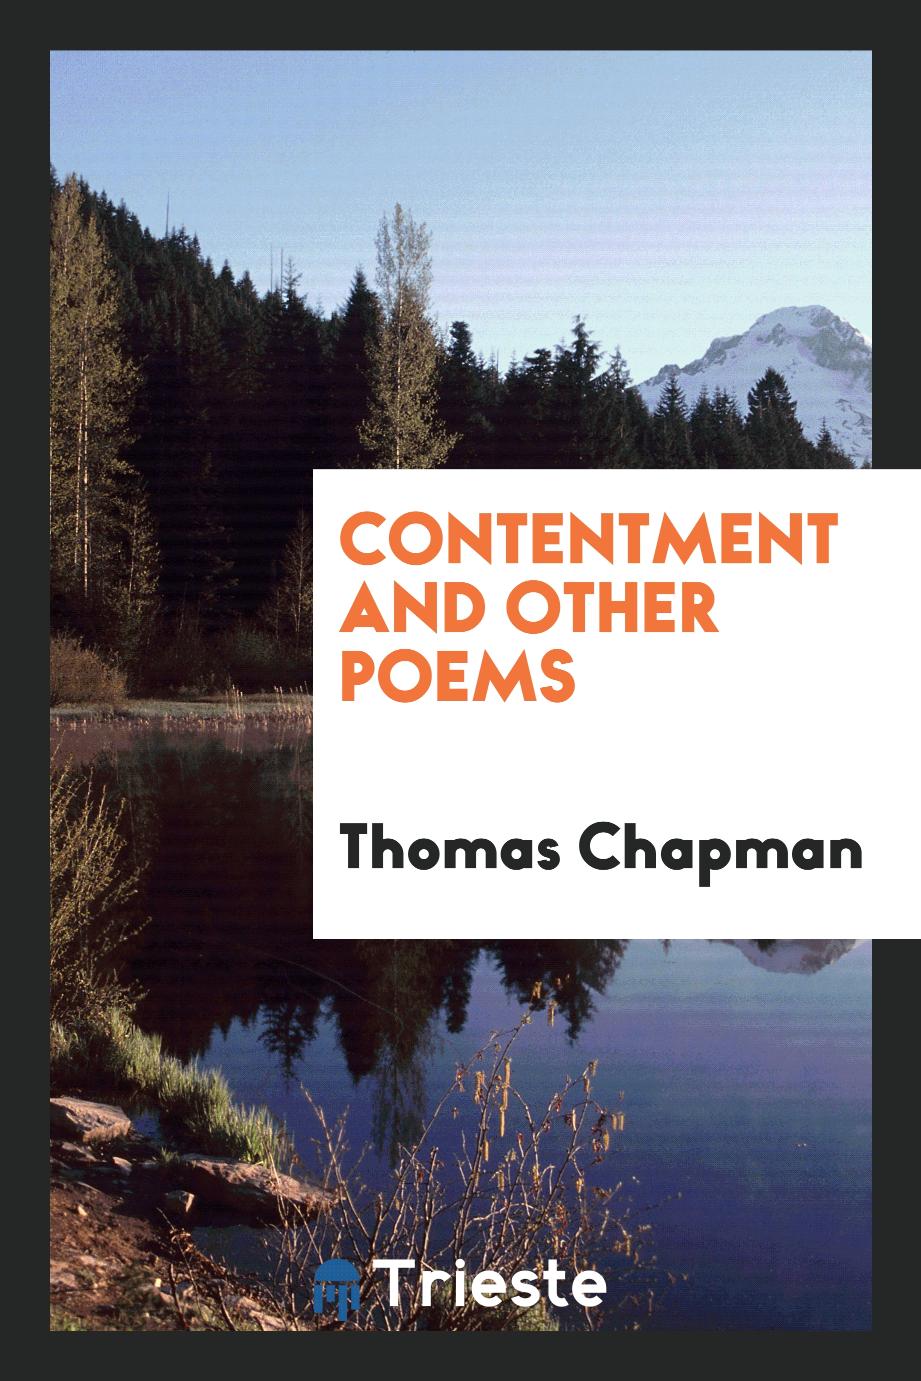 Contentment and other poems